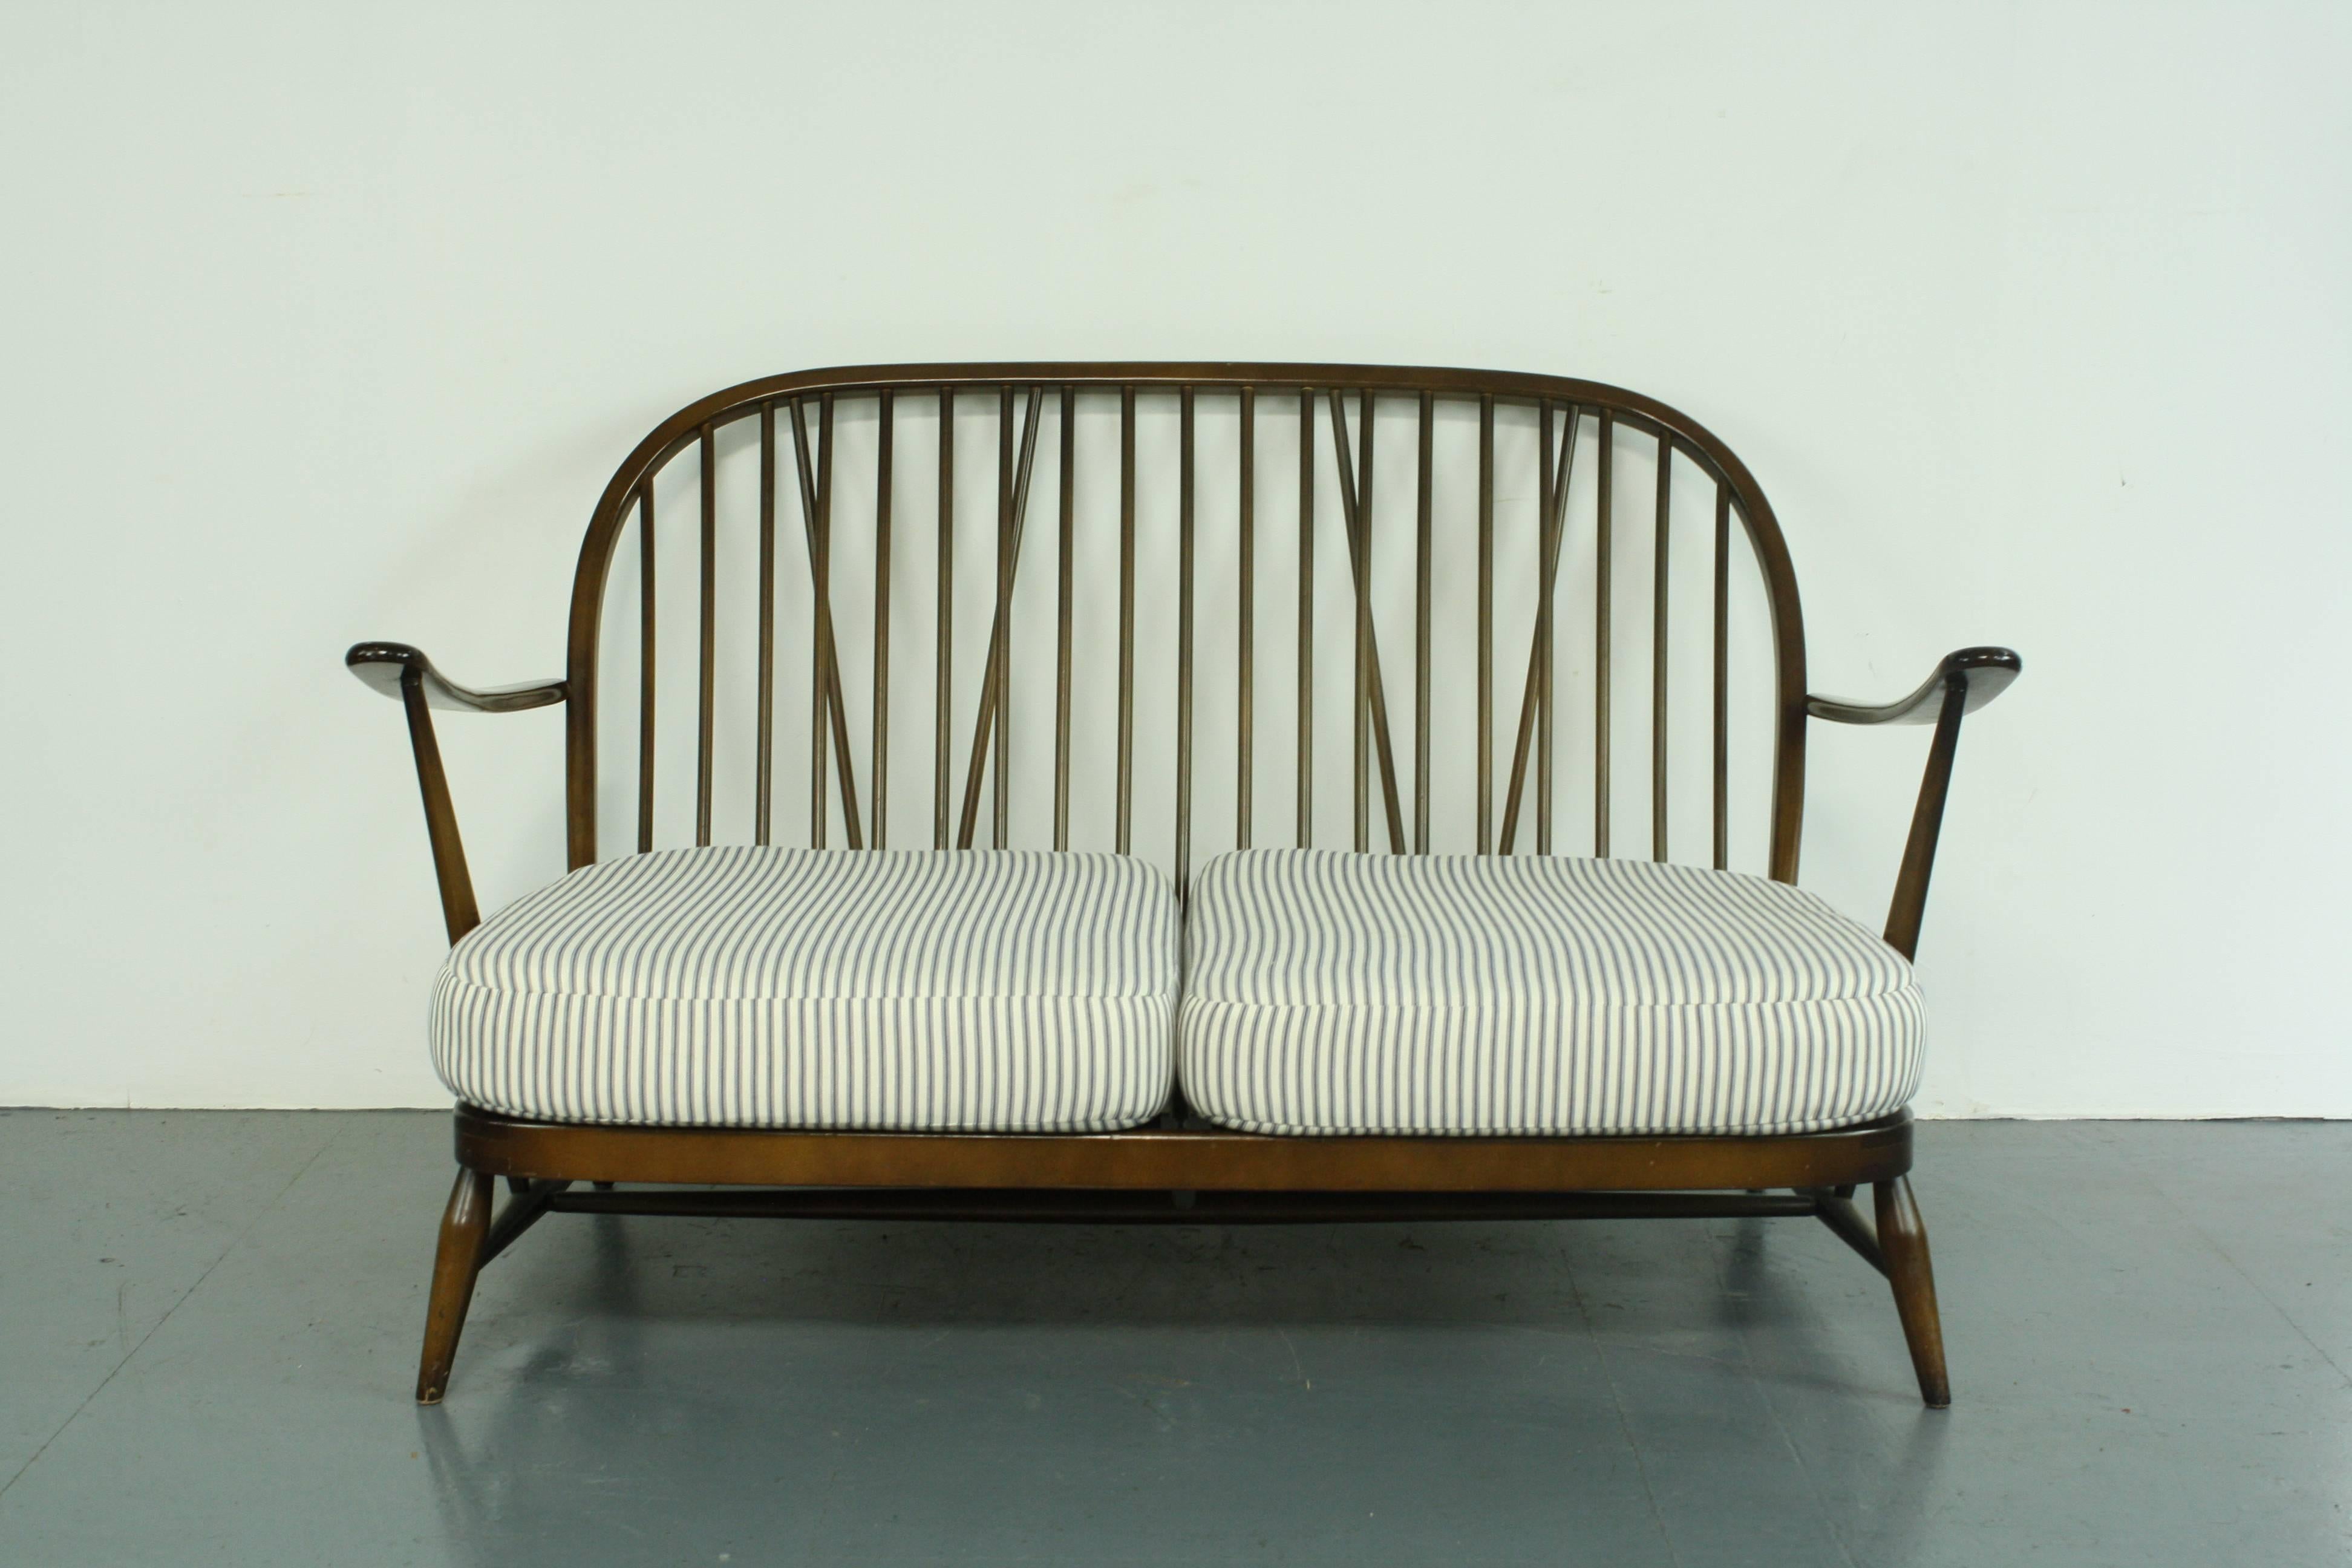 Refurbished dark elm Ercol Windsor two-Seat sofa.

Newly upholstered in lovely French ticking. 

This piece is in good vintage condition. The frame is solid and sturdy. There are a few scuffs, scratches and marks commensurate with age but